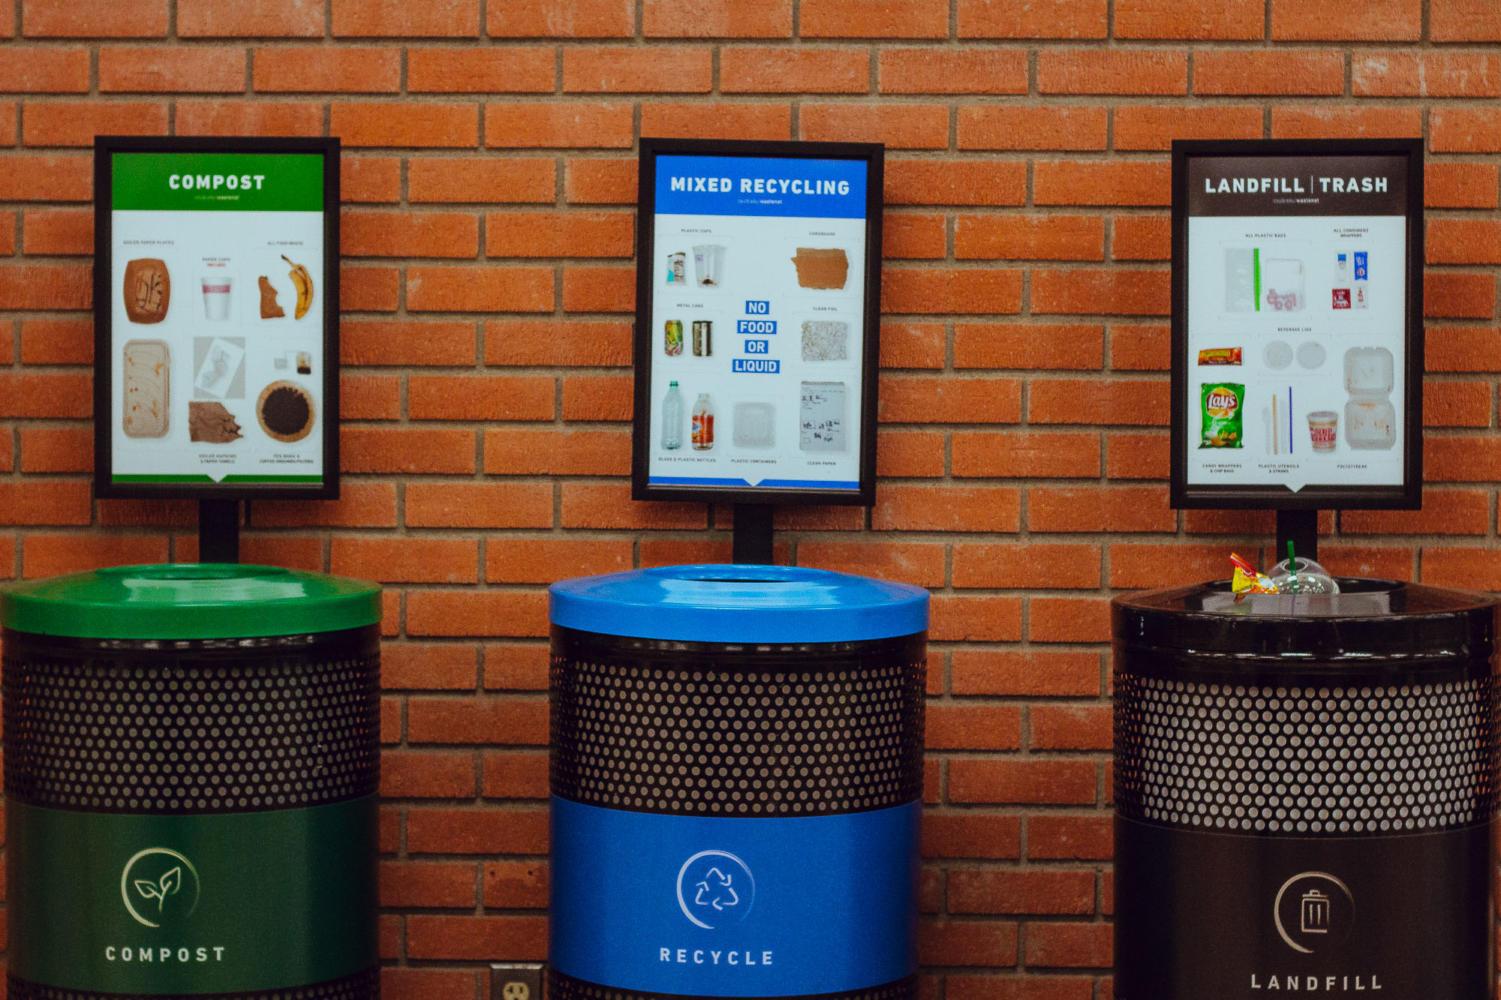 New waste bins seen in the first floor of the University Library. The “Zero Waste Stations” have been added as part of the Office of Sustainability’s Waste Not project to make the campus more eco-friendly.